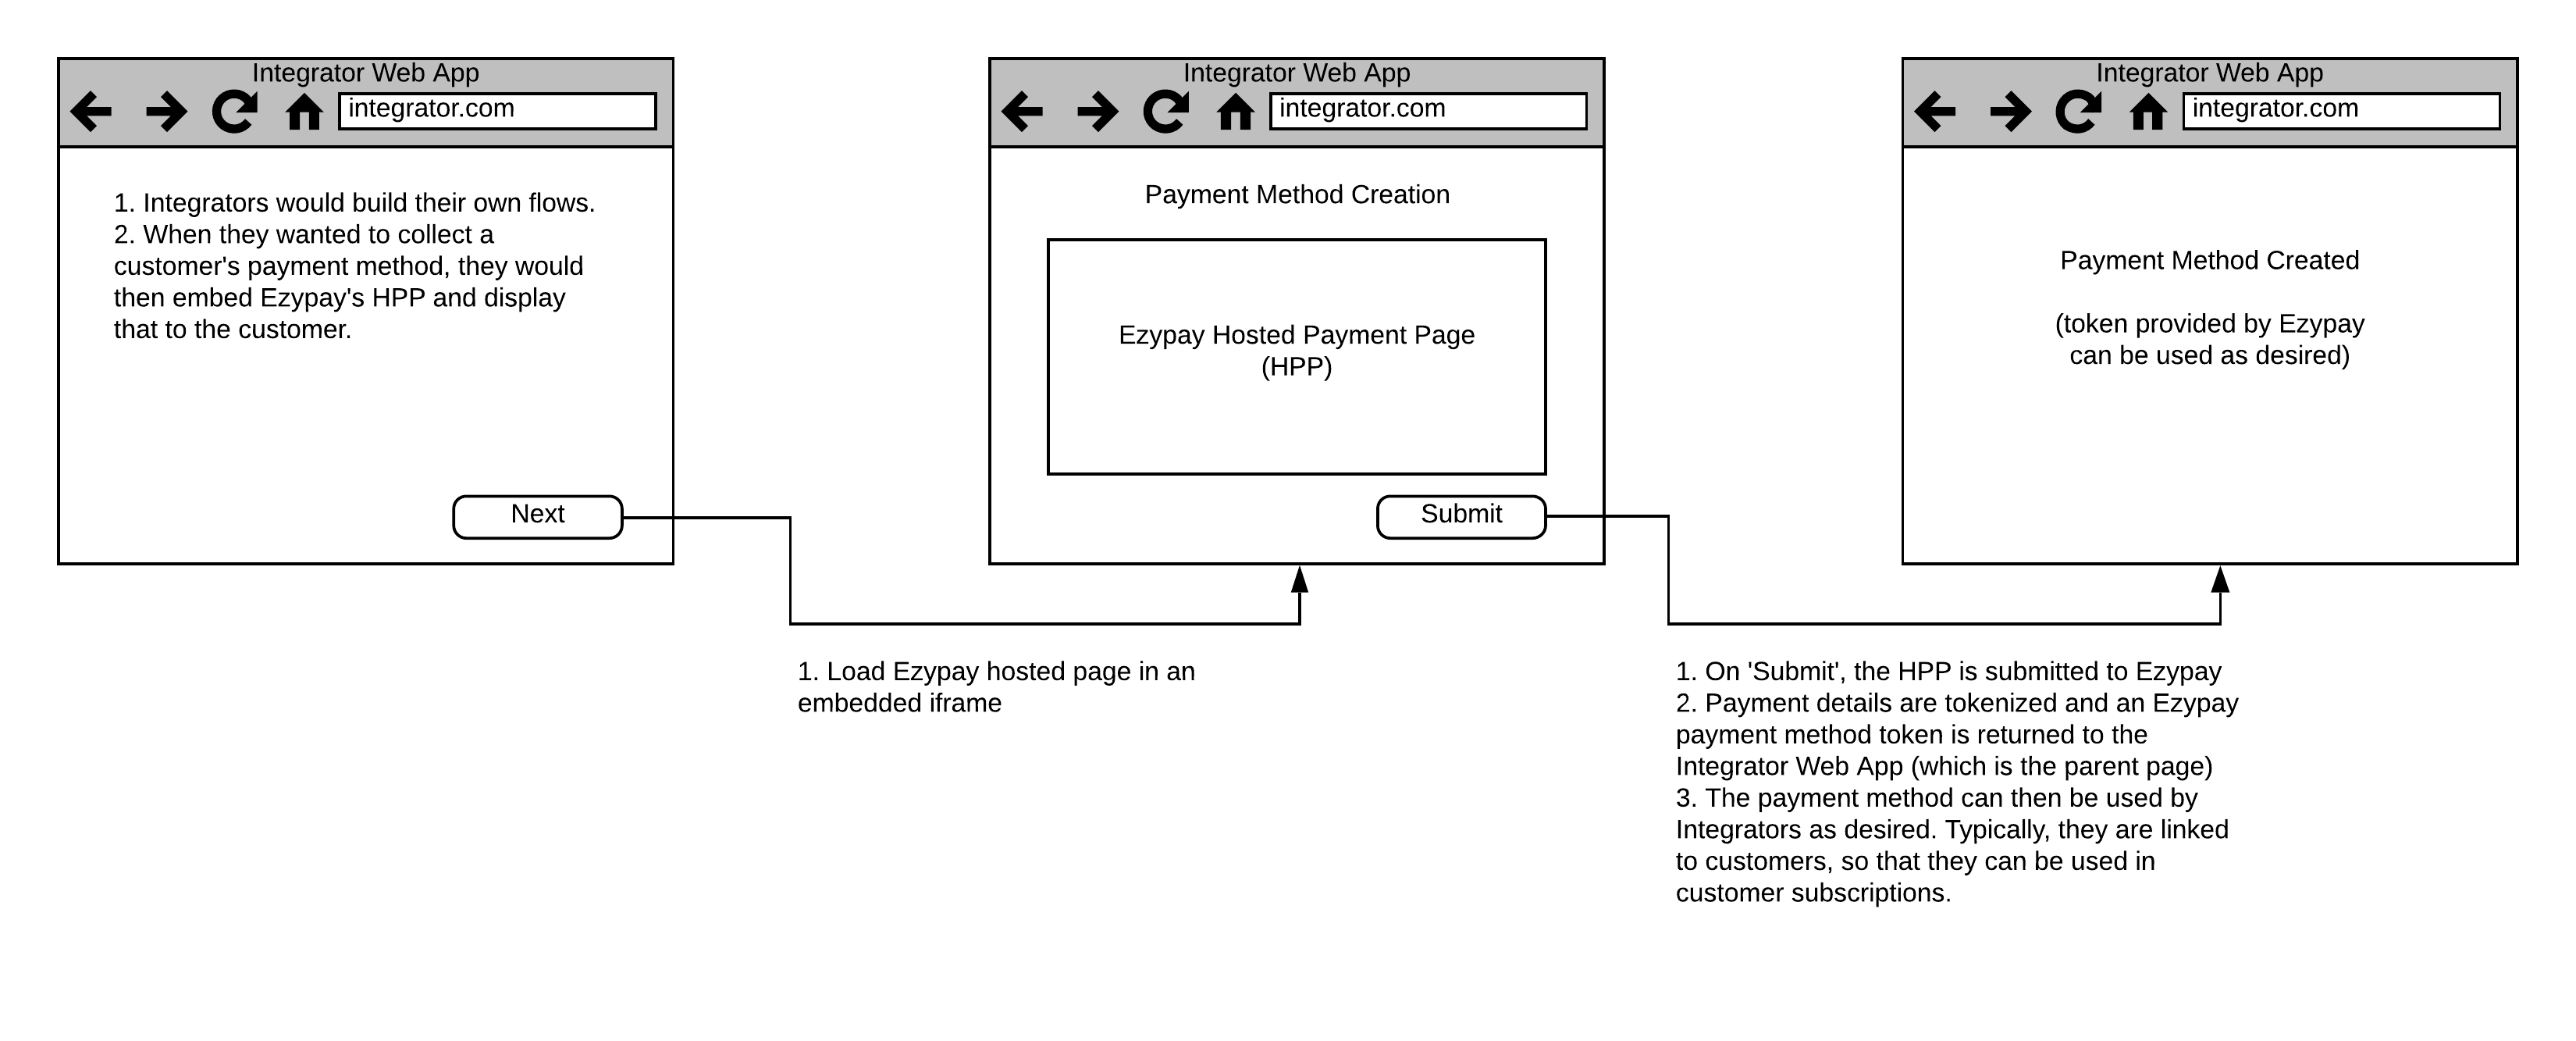 Current Hosted Payment Page Flow